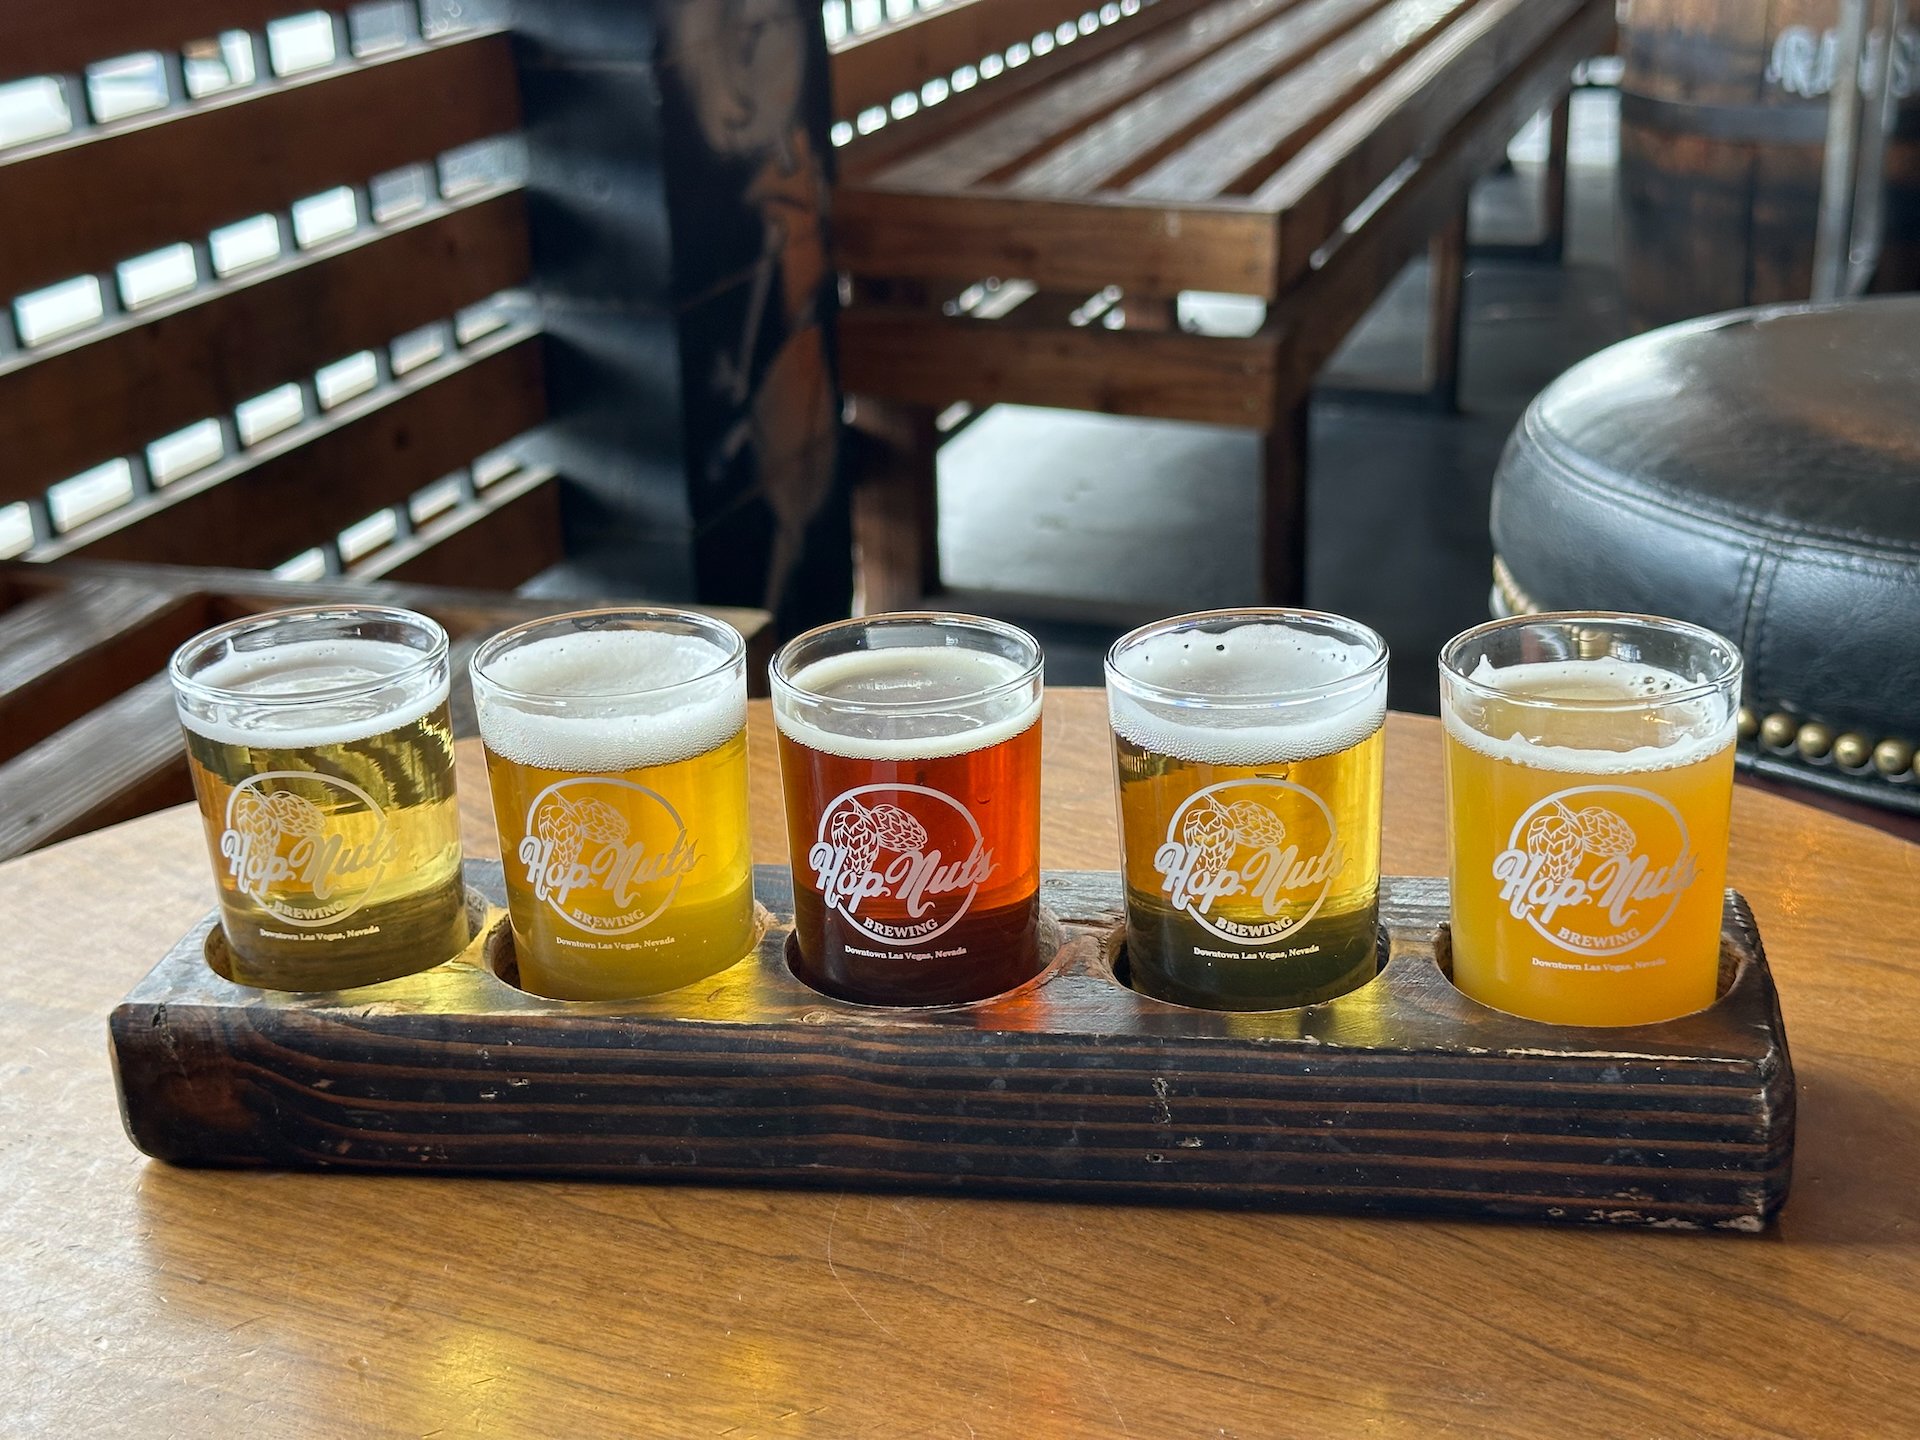  I grabbed a flight with a pretty good range of different types of beer.  